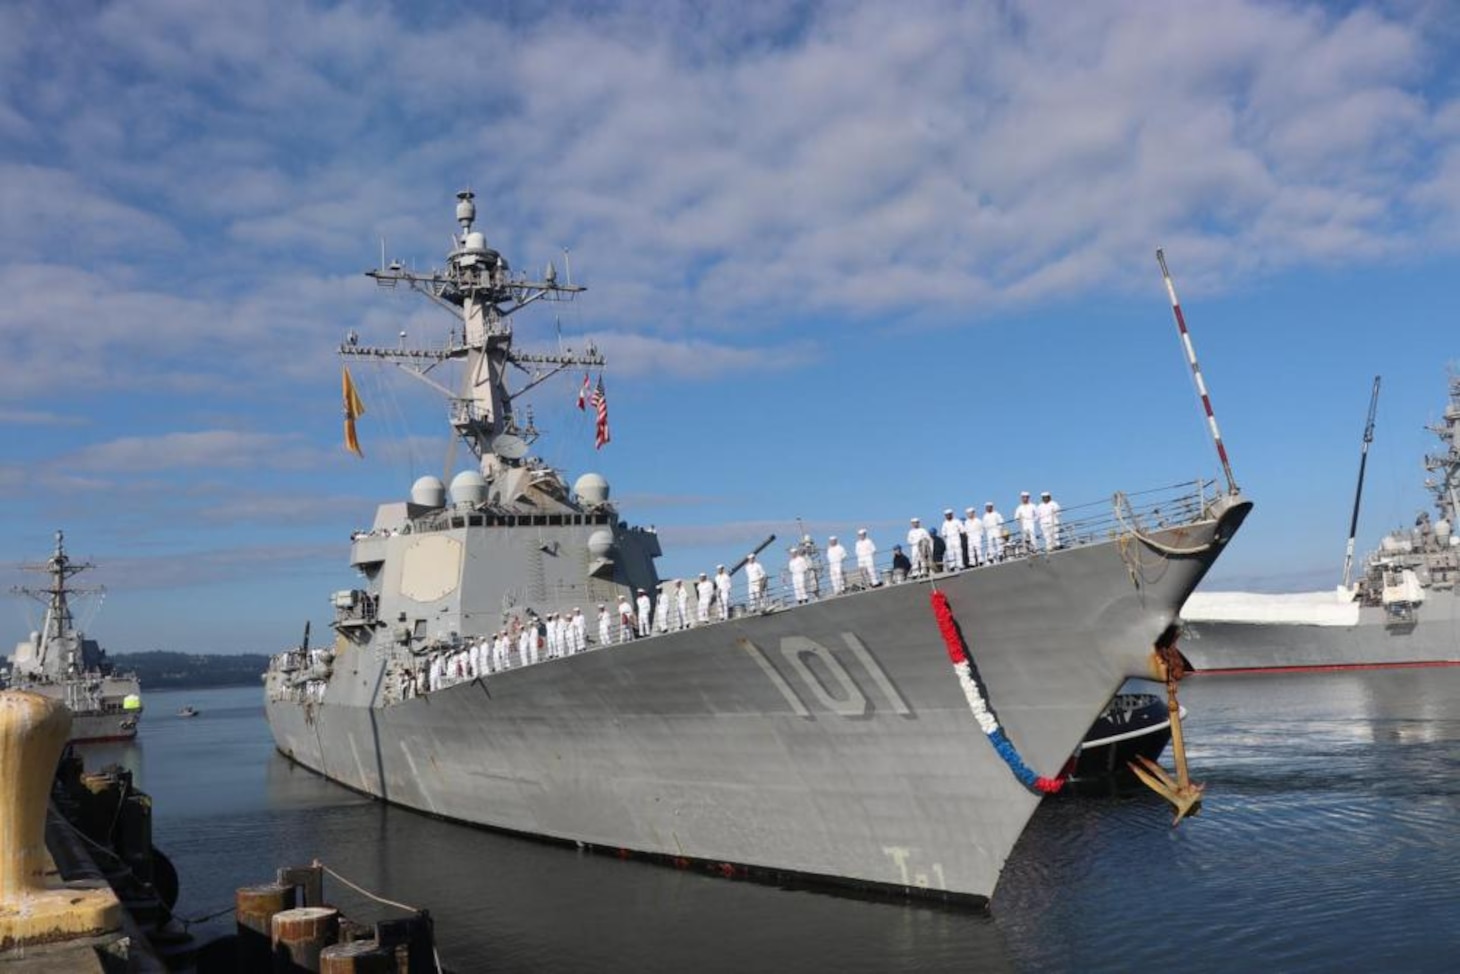 Arleigh Burke-class guided-missile destroyer USS Gridley (DDG 101) returns home to Naval Station Everett, Aug. 11.